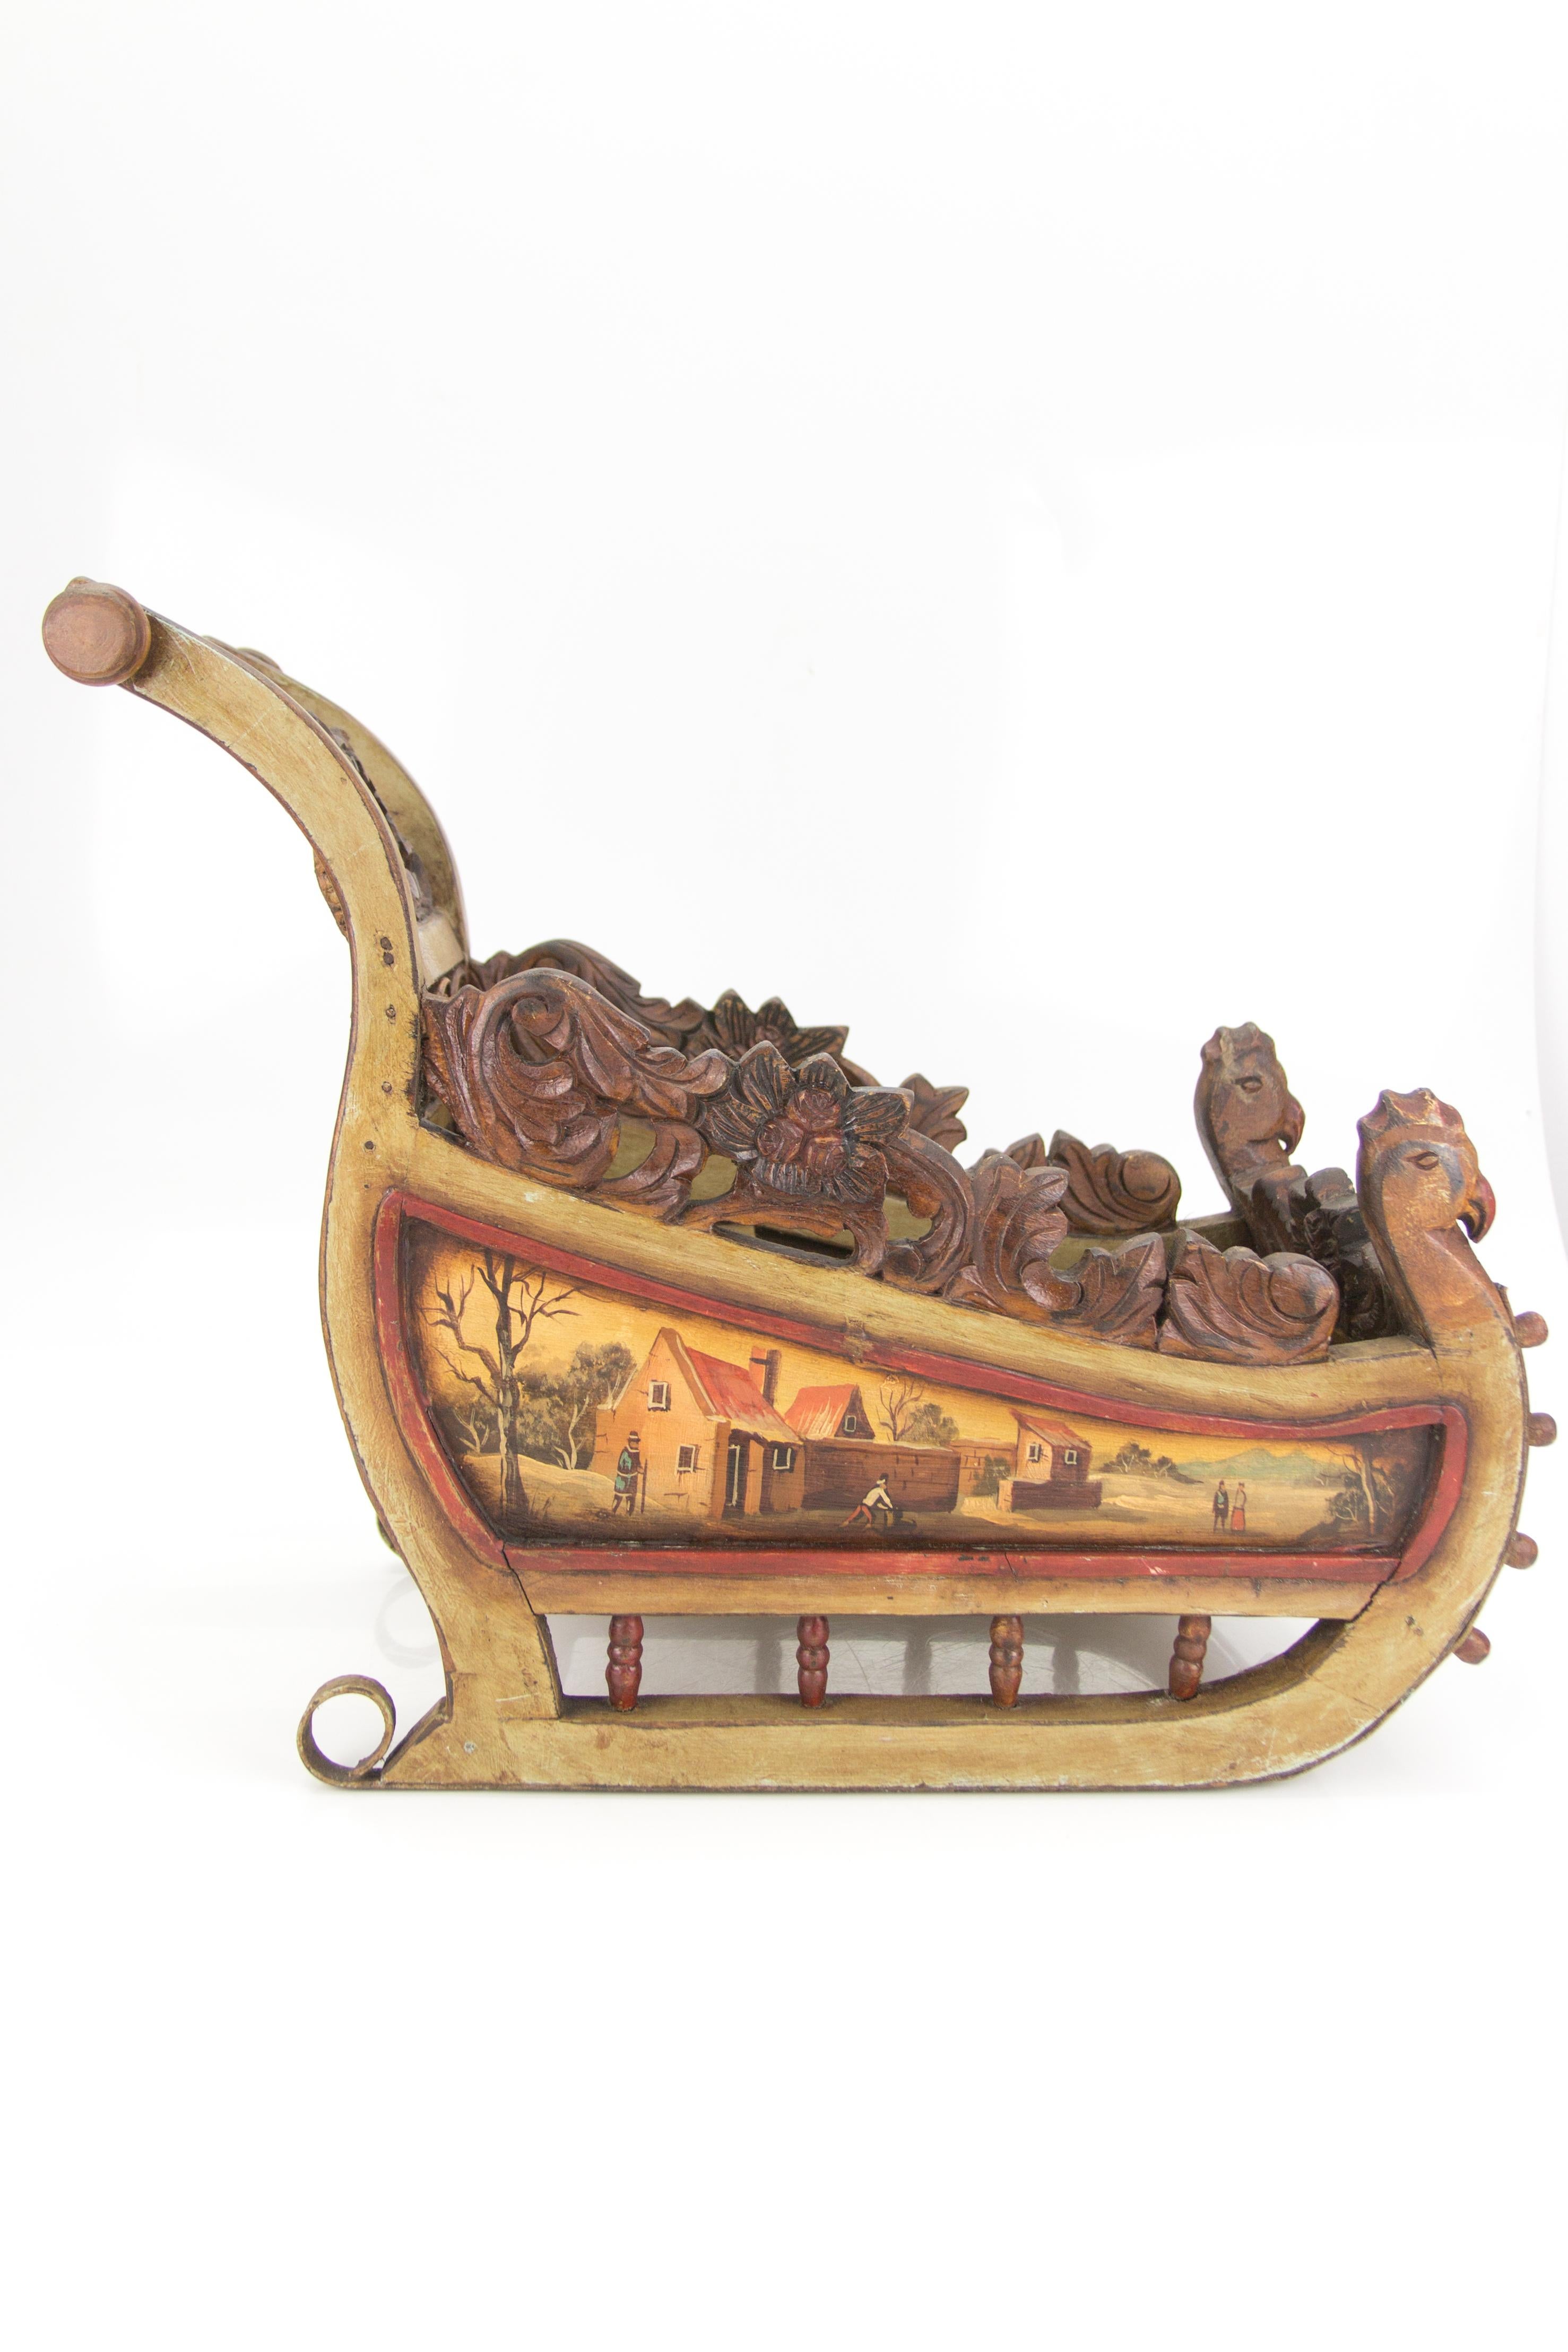 Old German Carved Wooden Sleigh with Hand Painted Scenes 1